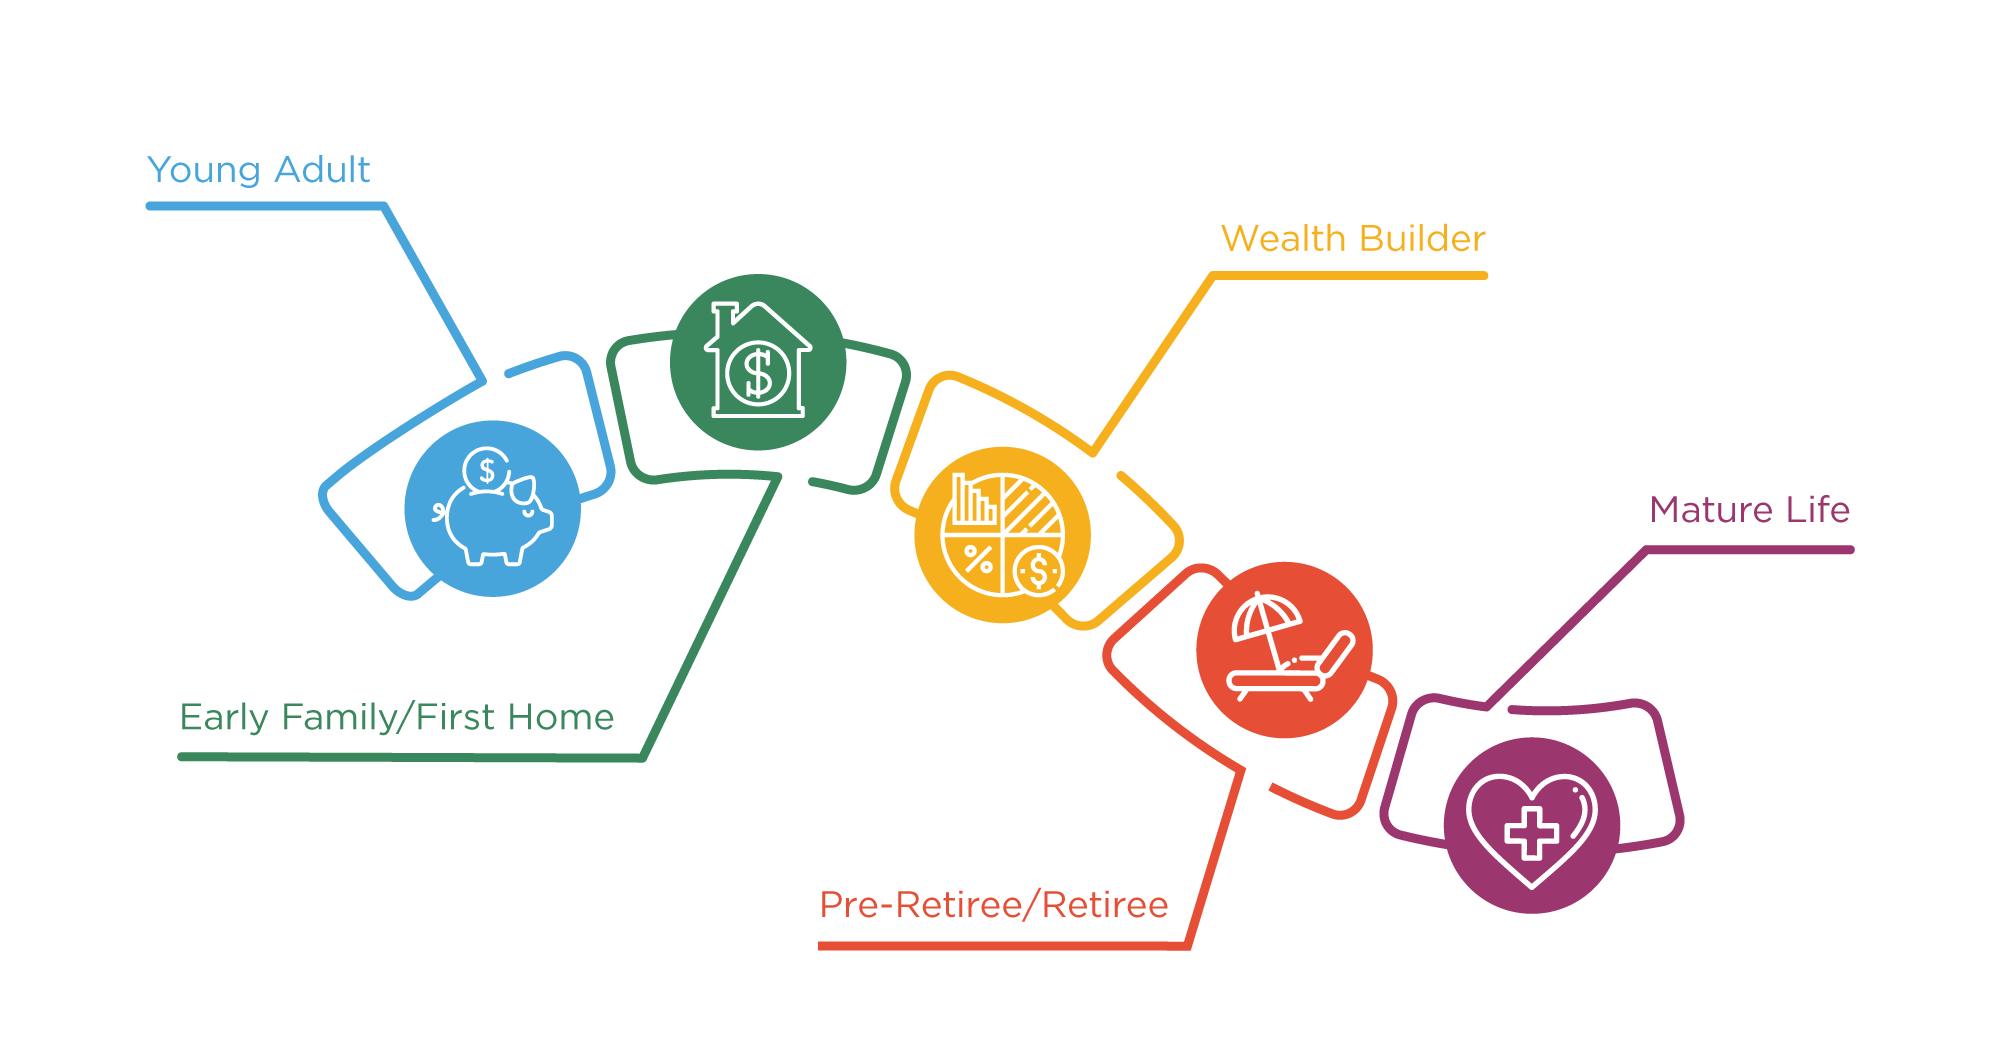 Timeline graphic showing typical stages of life as it relates to wealth management and financial planning; Young Adult, Early Family/First Home, Wealth Builder, Pre-Retiree/Retiree, Mature Life.